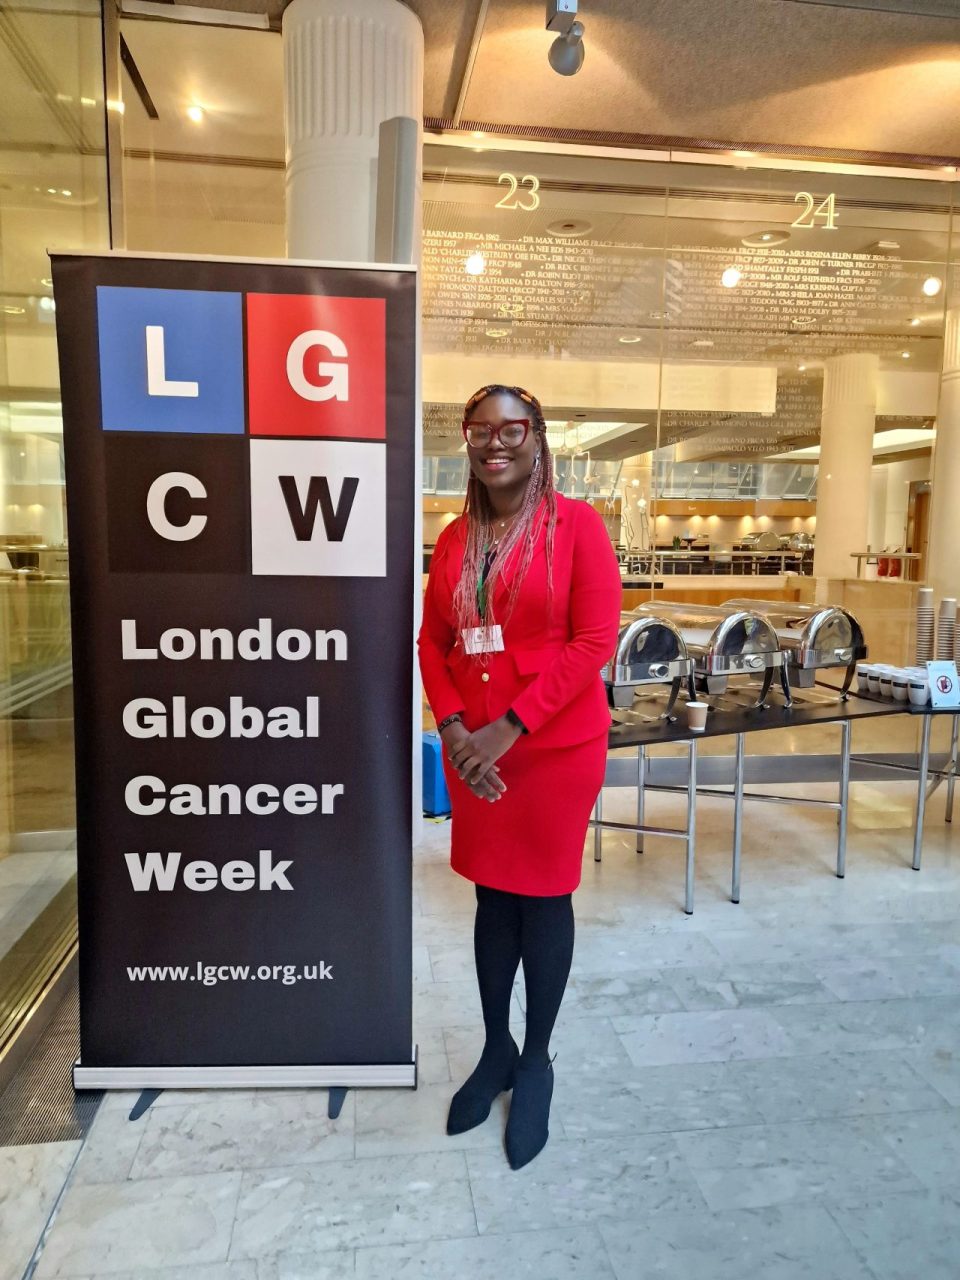 Olubukola Ayodele: This meeting has definitely fueled my passion for global oncology